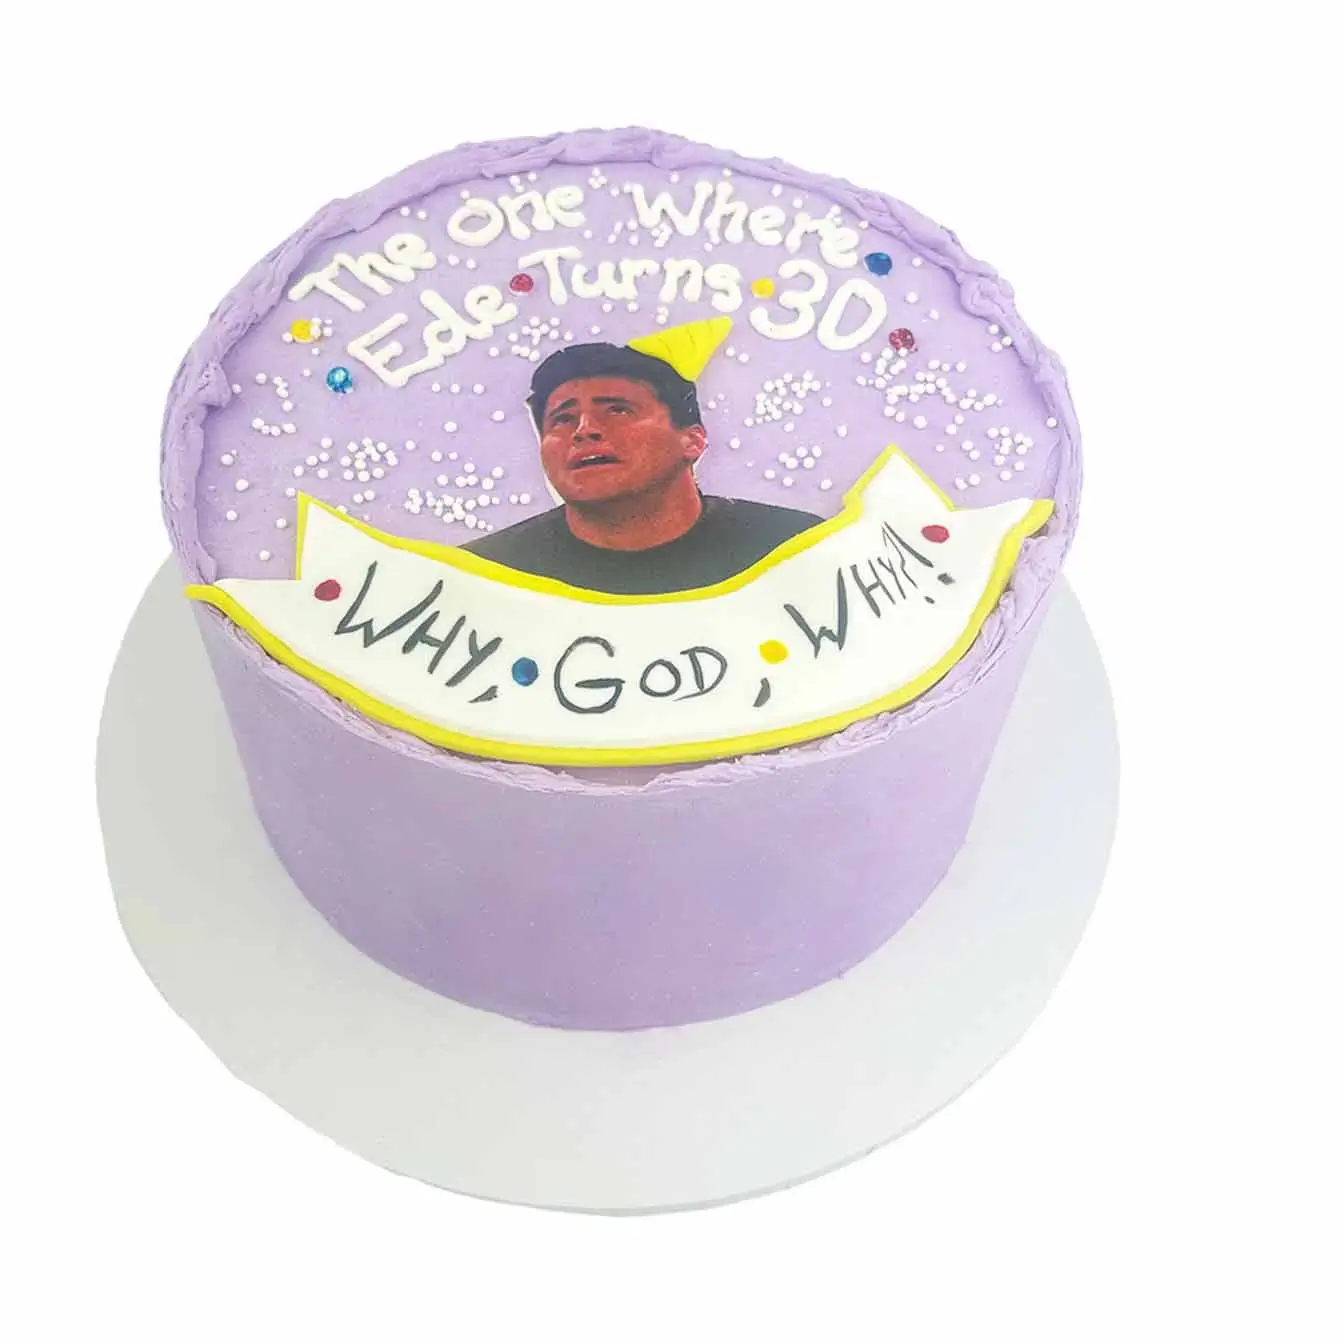 Joey's Iconic Lament Cake - A humorous cake featuring Joey from Friends and his famous saying 'Why, God, Why?' a playful centerpiece for Friends fans.